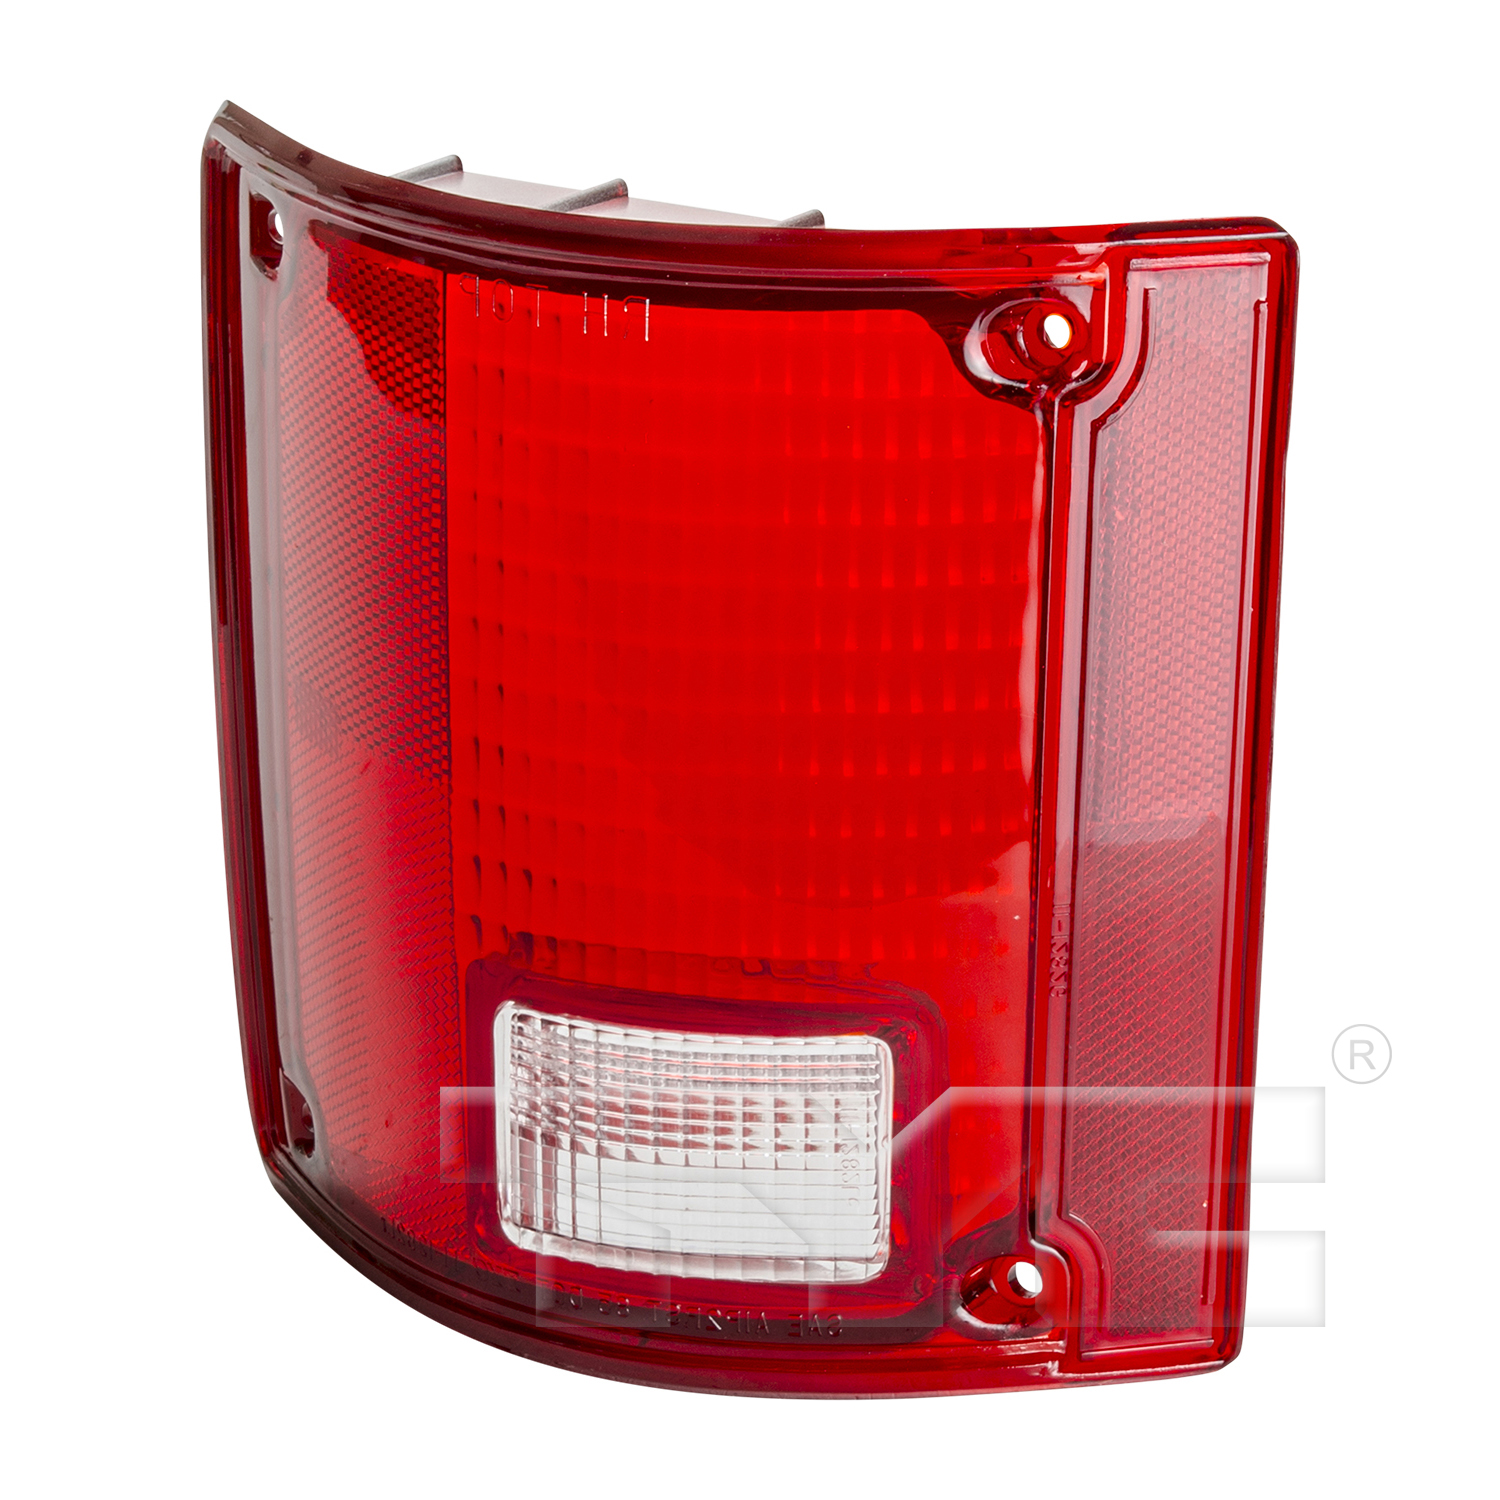 Aftermarket TAILLIGHTS for CHEVROLET - C10, C10,75-86,LT Taillamp lens